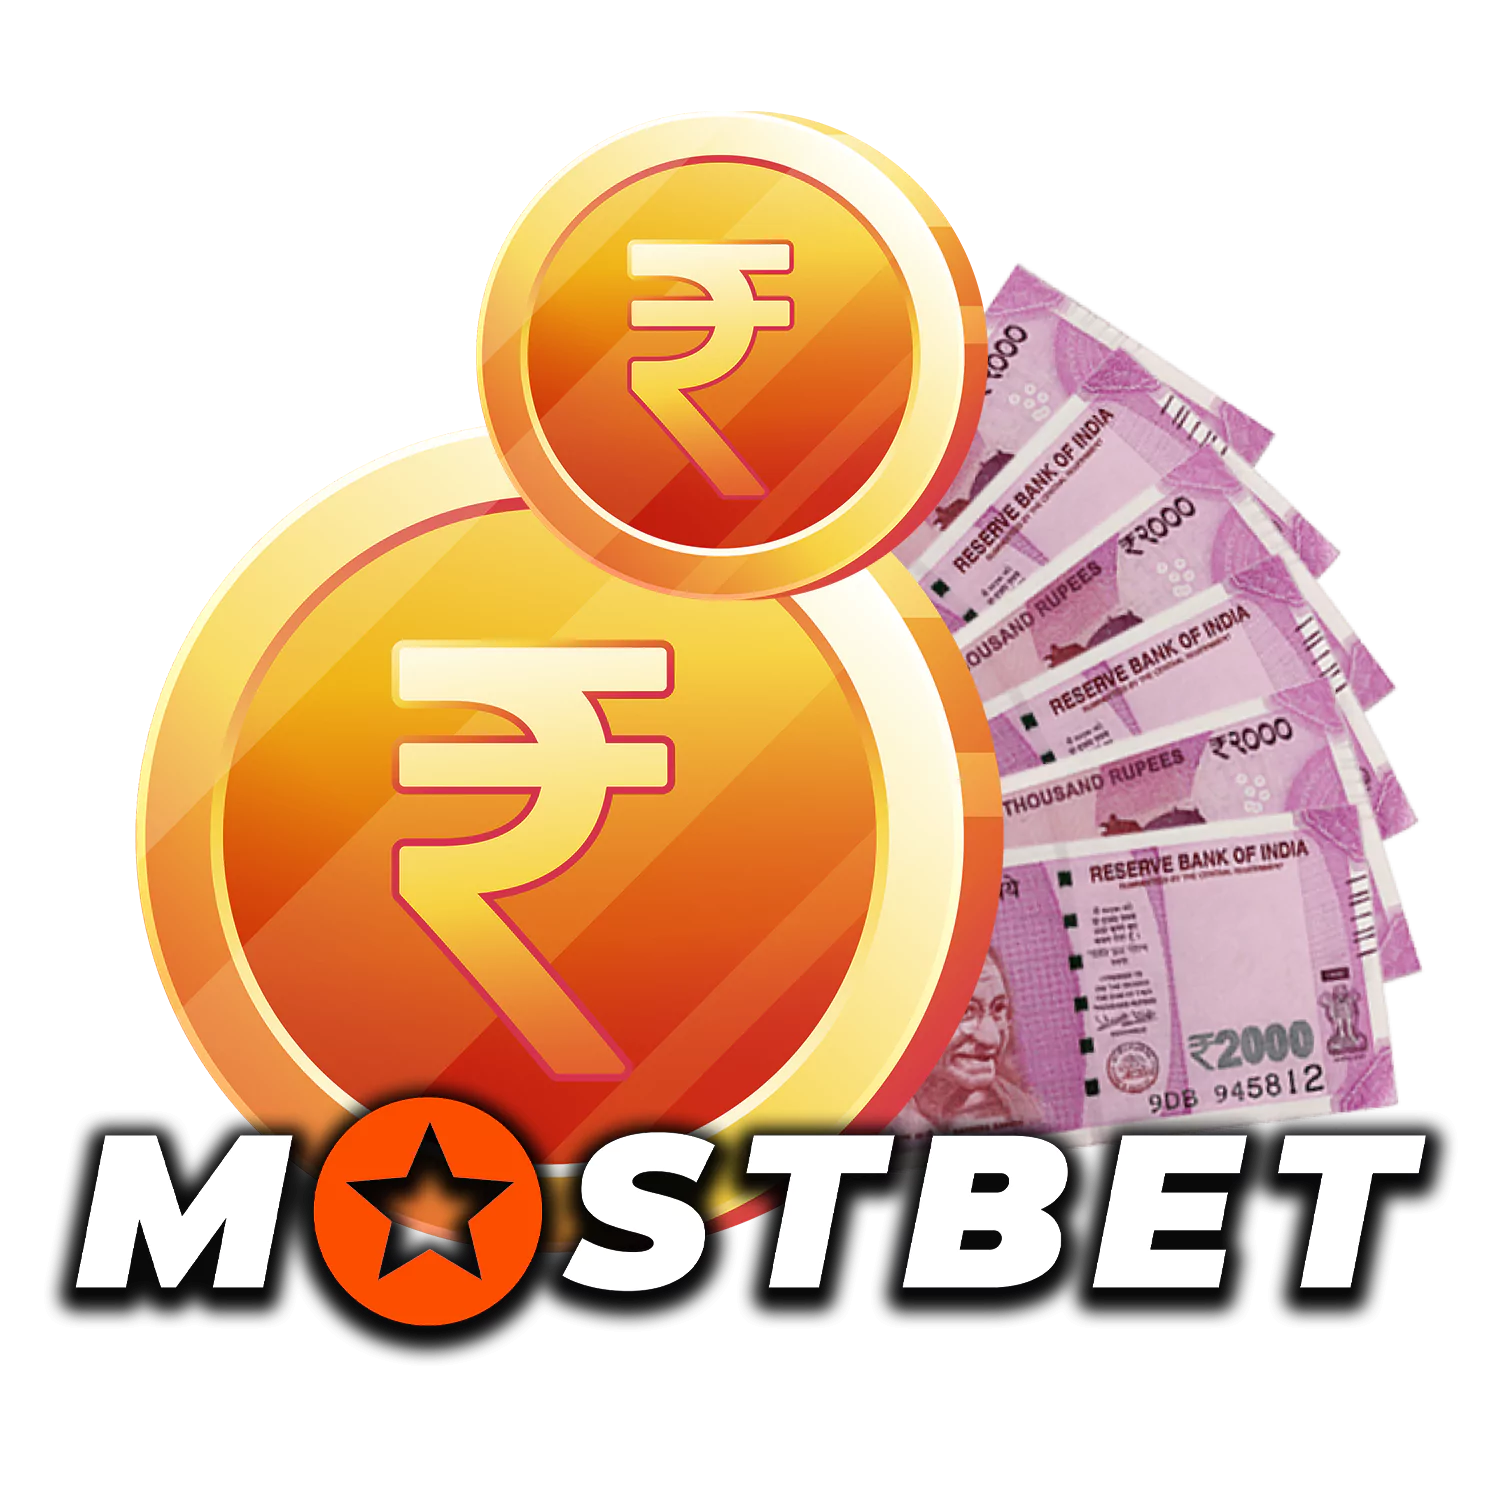 Payments in Mostbet India: deposit and withdrawal methods, limits, step-by-step guides.